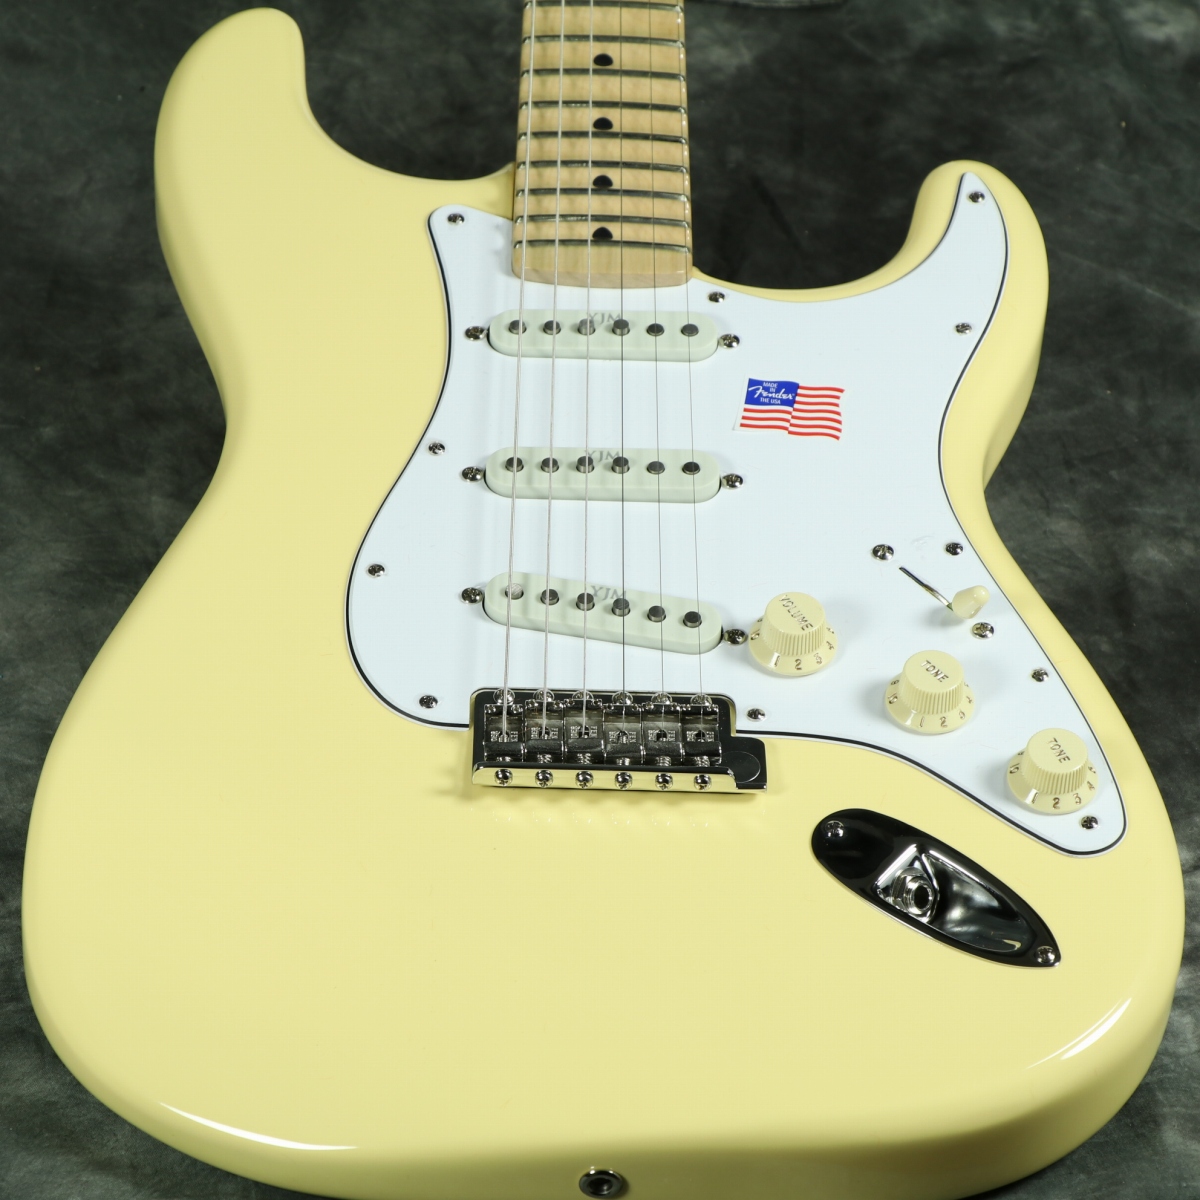 Fender USA / Yngwie Malmsteen Signature Stratocaster Vintage White